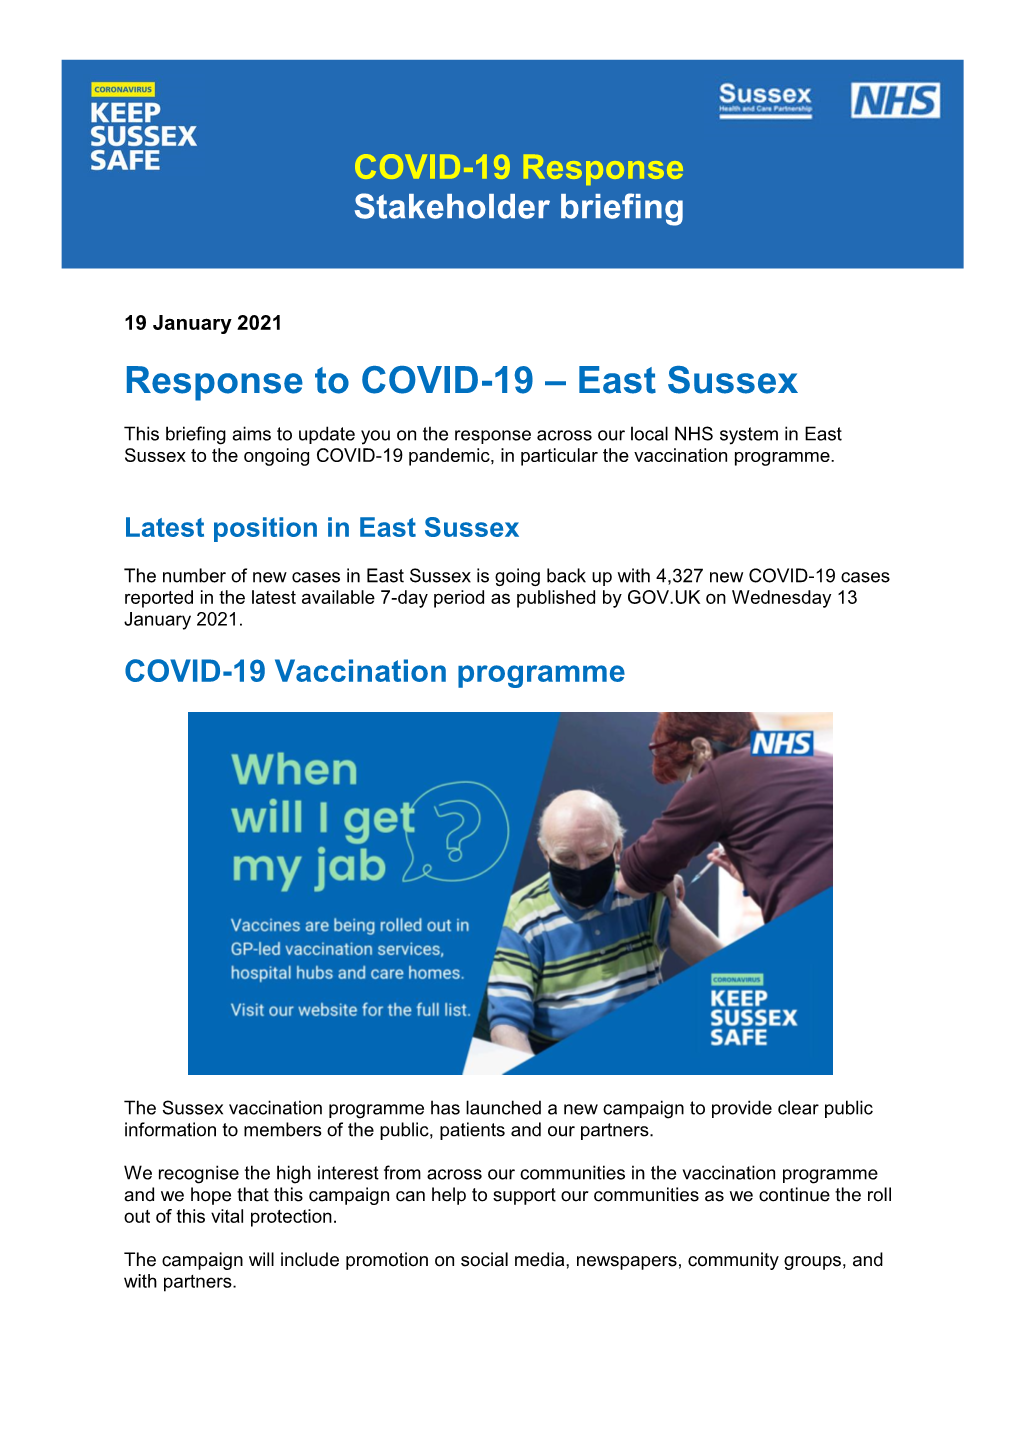 East Sussex COVID-19 Vaccination Stakeholder Briefing 19 January 2021